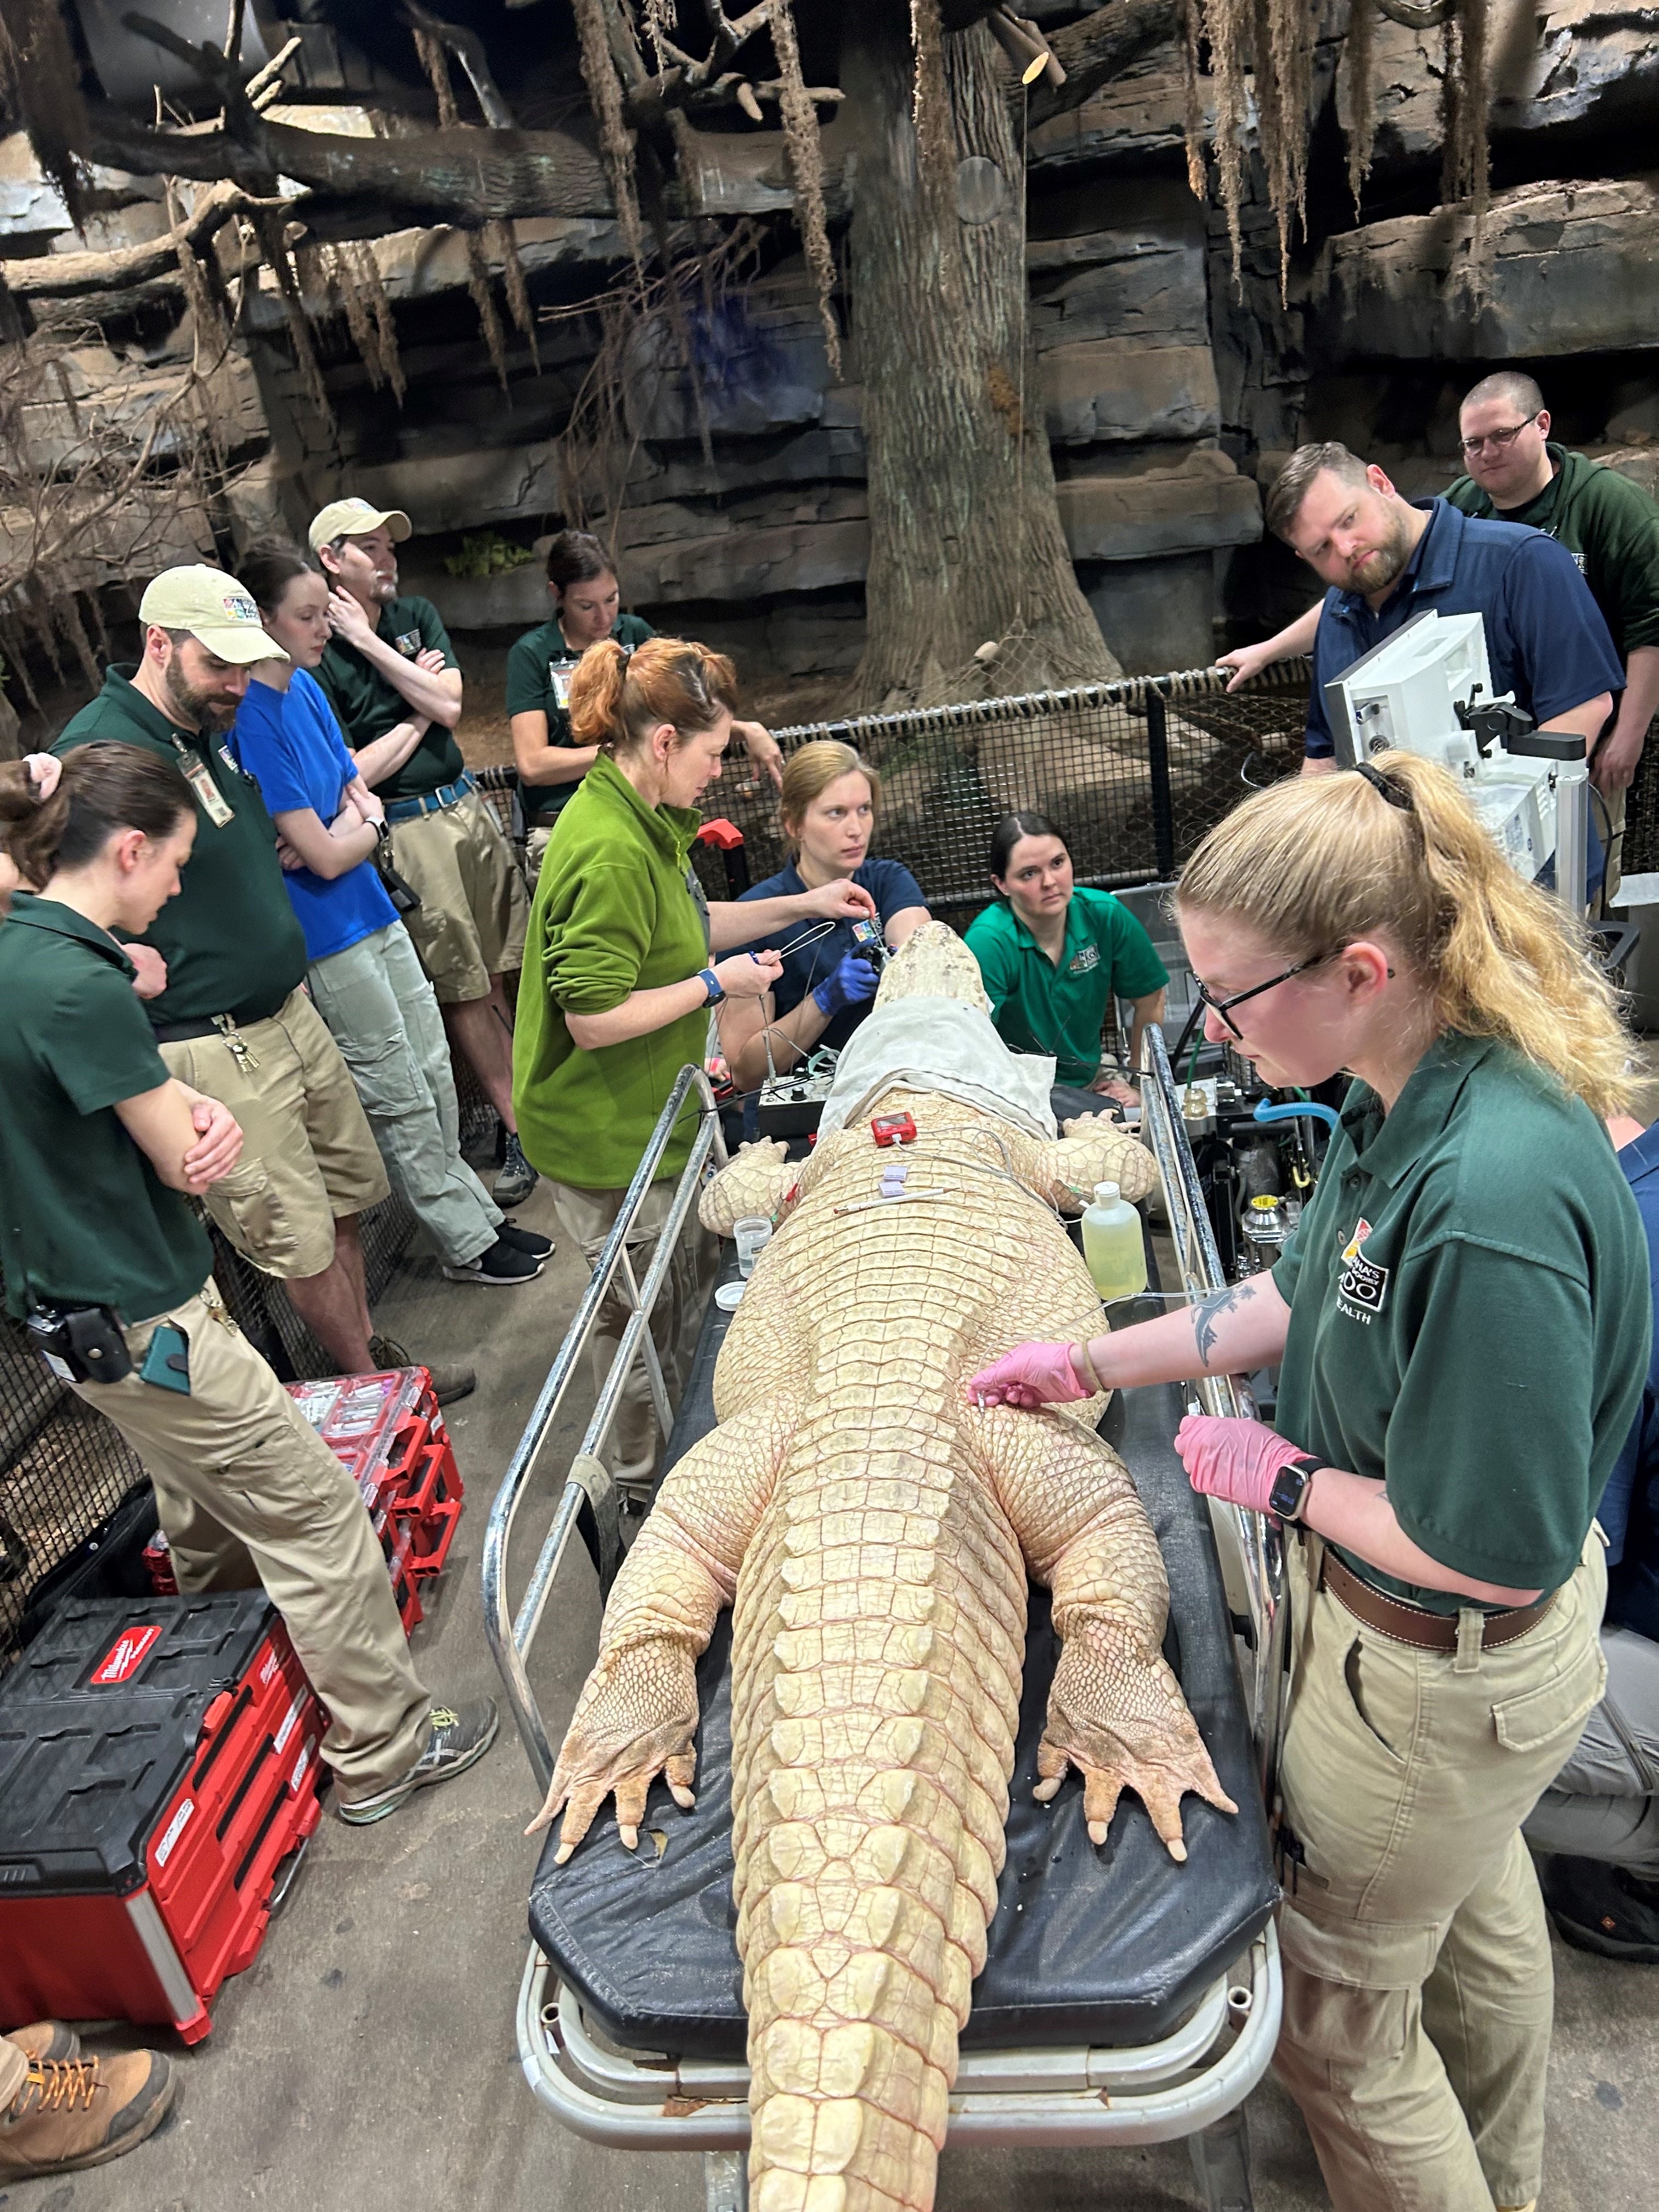 Long white alligator ona surgery table with lots of people watching and vets.